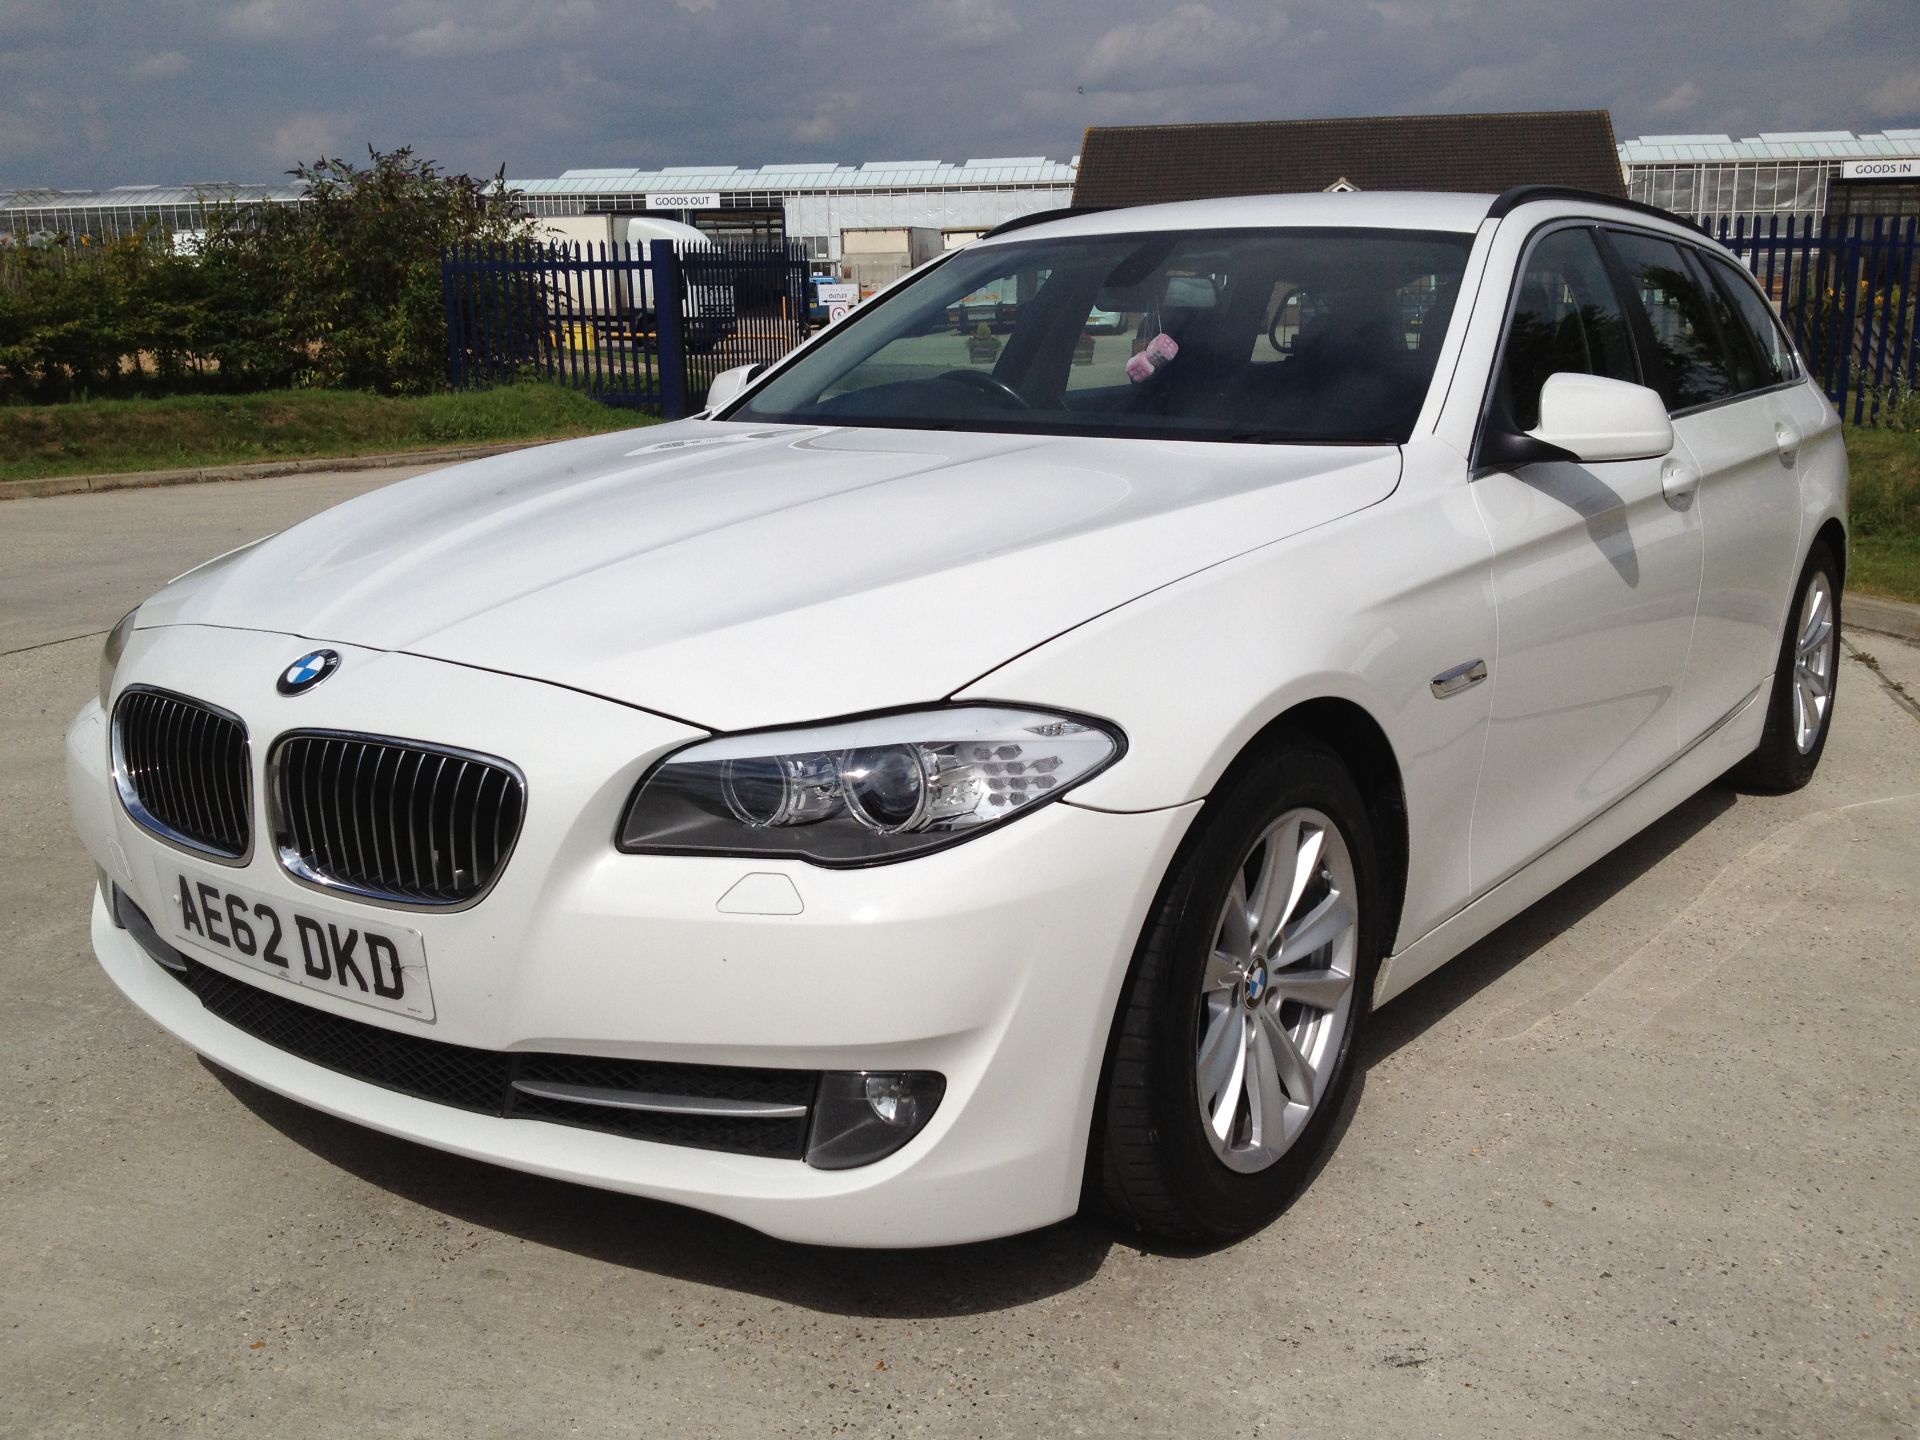 2012 bmw 530d diesel estate auto 52,000 miles 1 owner from new still under manufactures warranty - Image 8 of 9